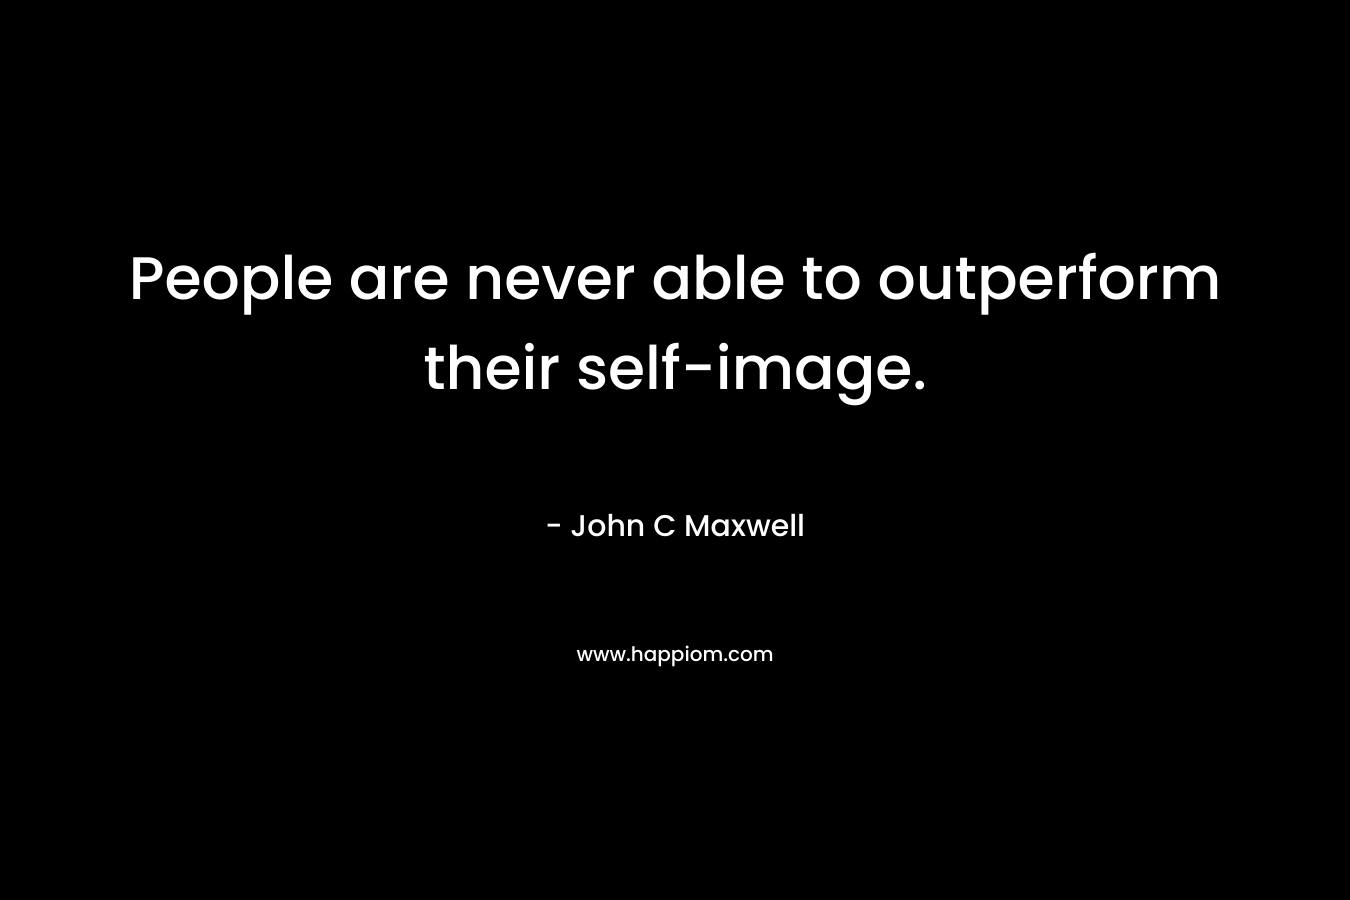 People are never able to outperform their self-image.